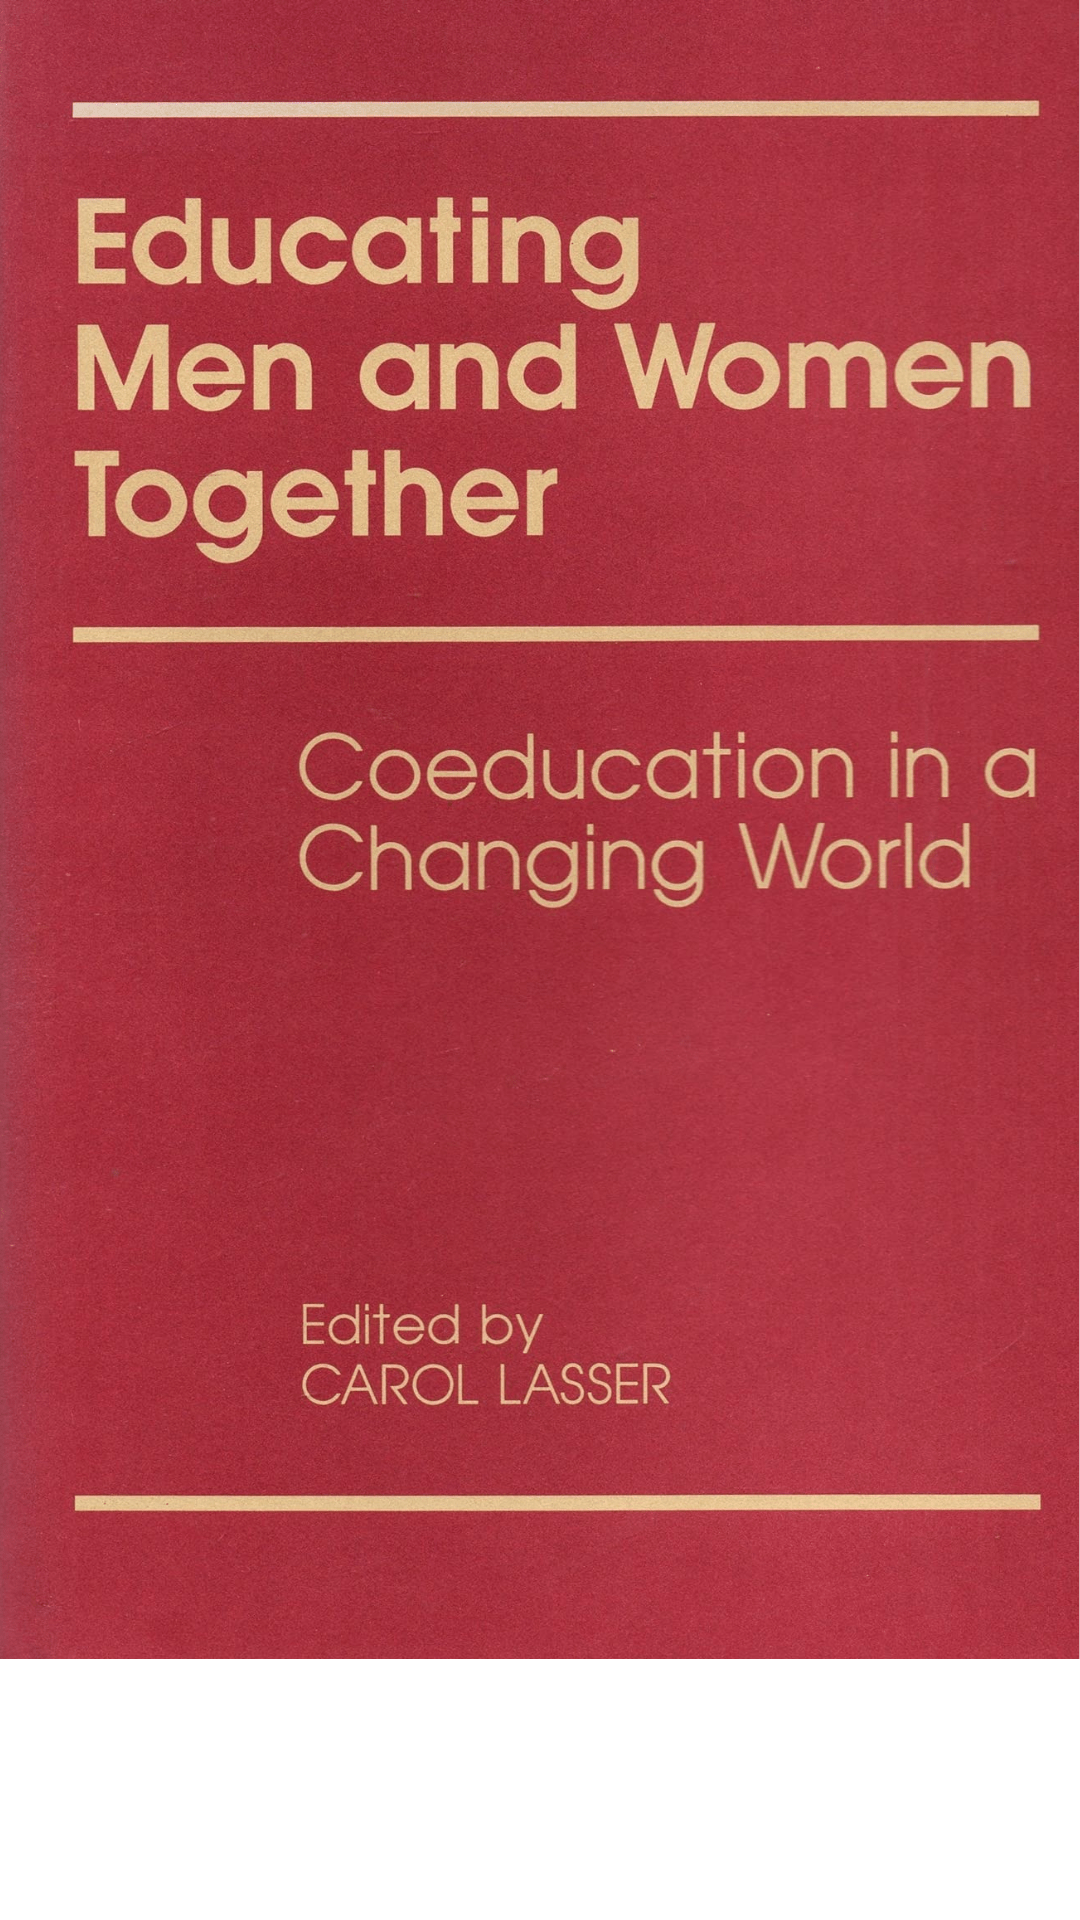 Educating Men and Women Together: Coeducation in a Changing World